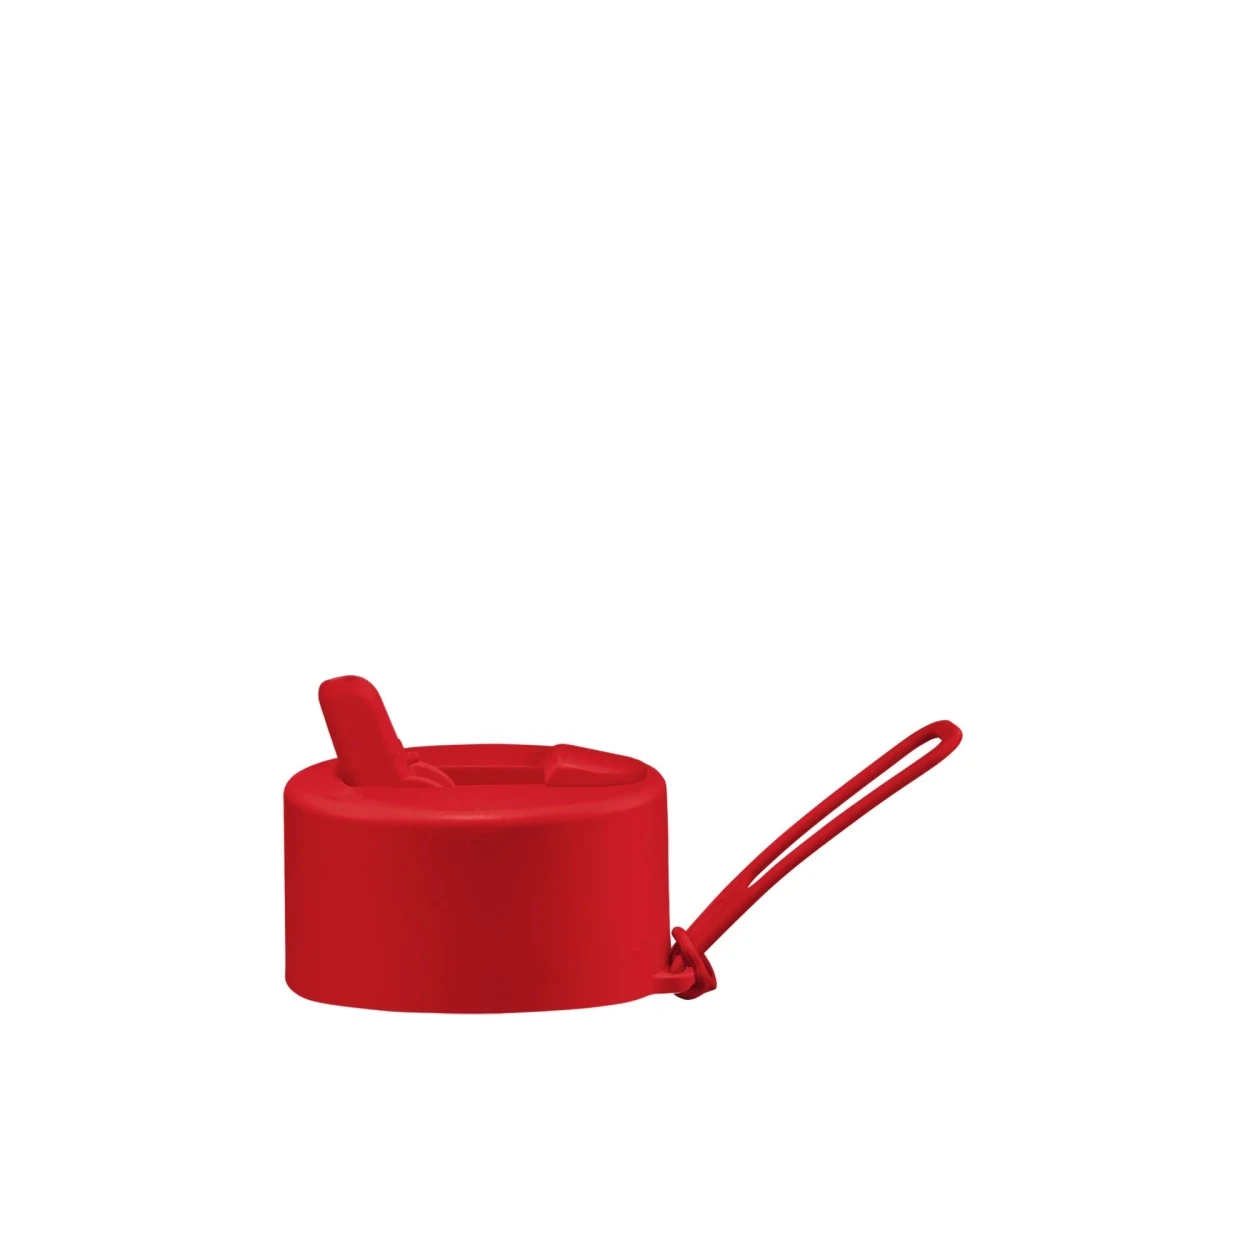 Frank Green Limited Edition Flip Straw Lid Atomic Red Image 1